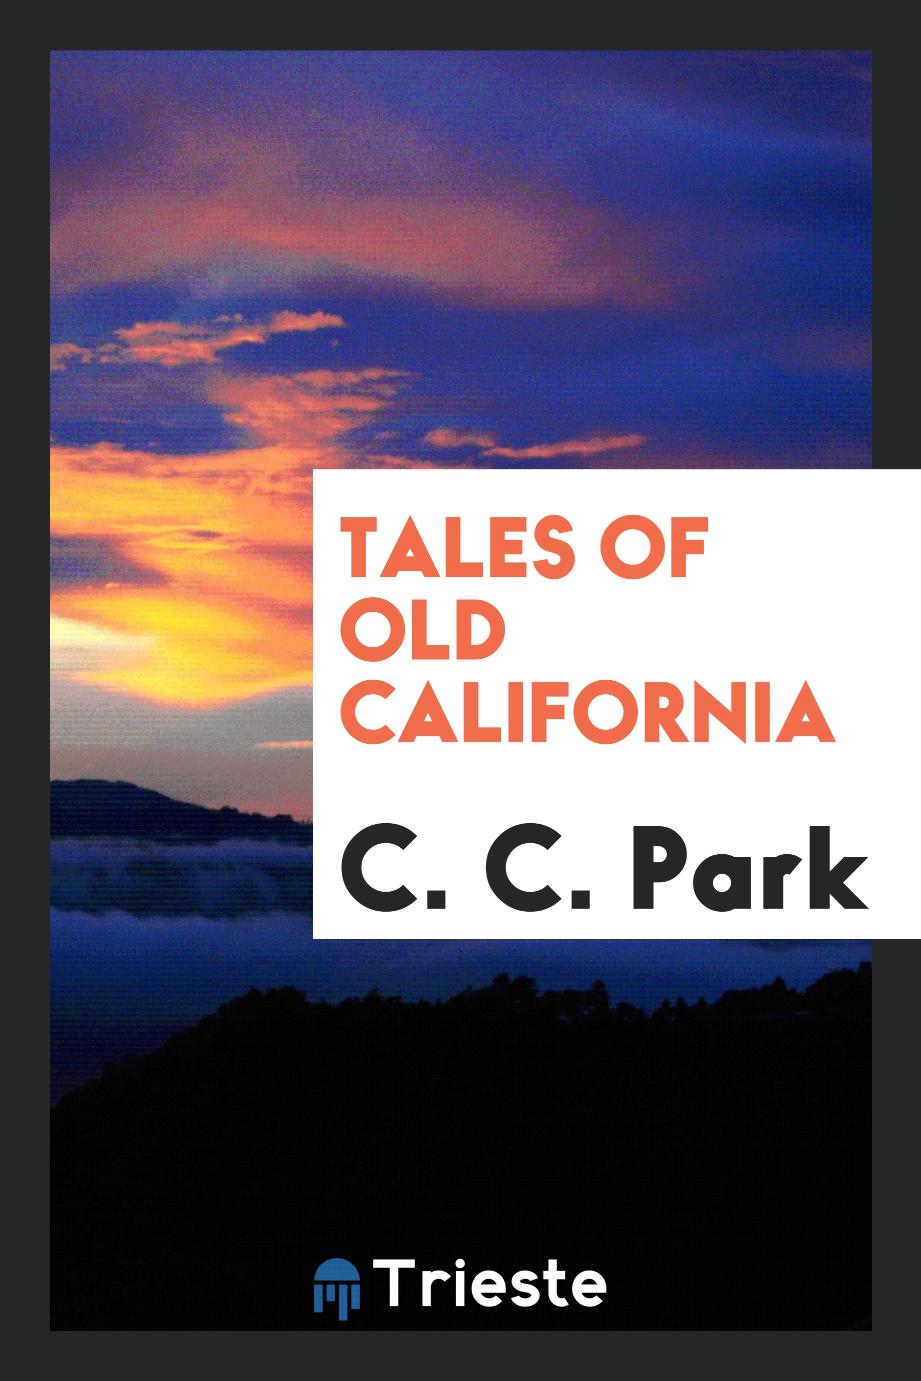 Tales of old California